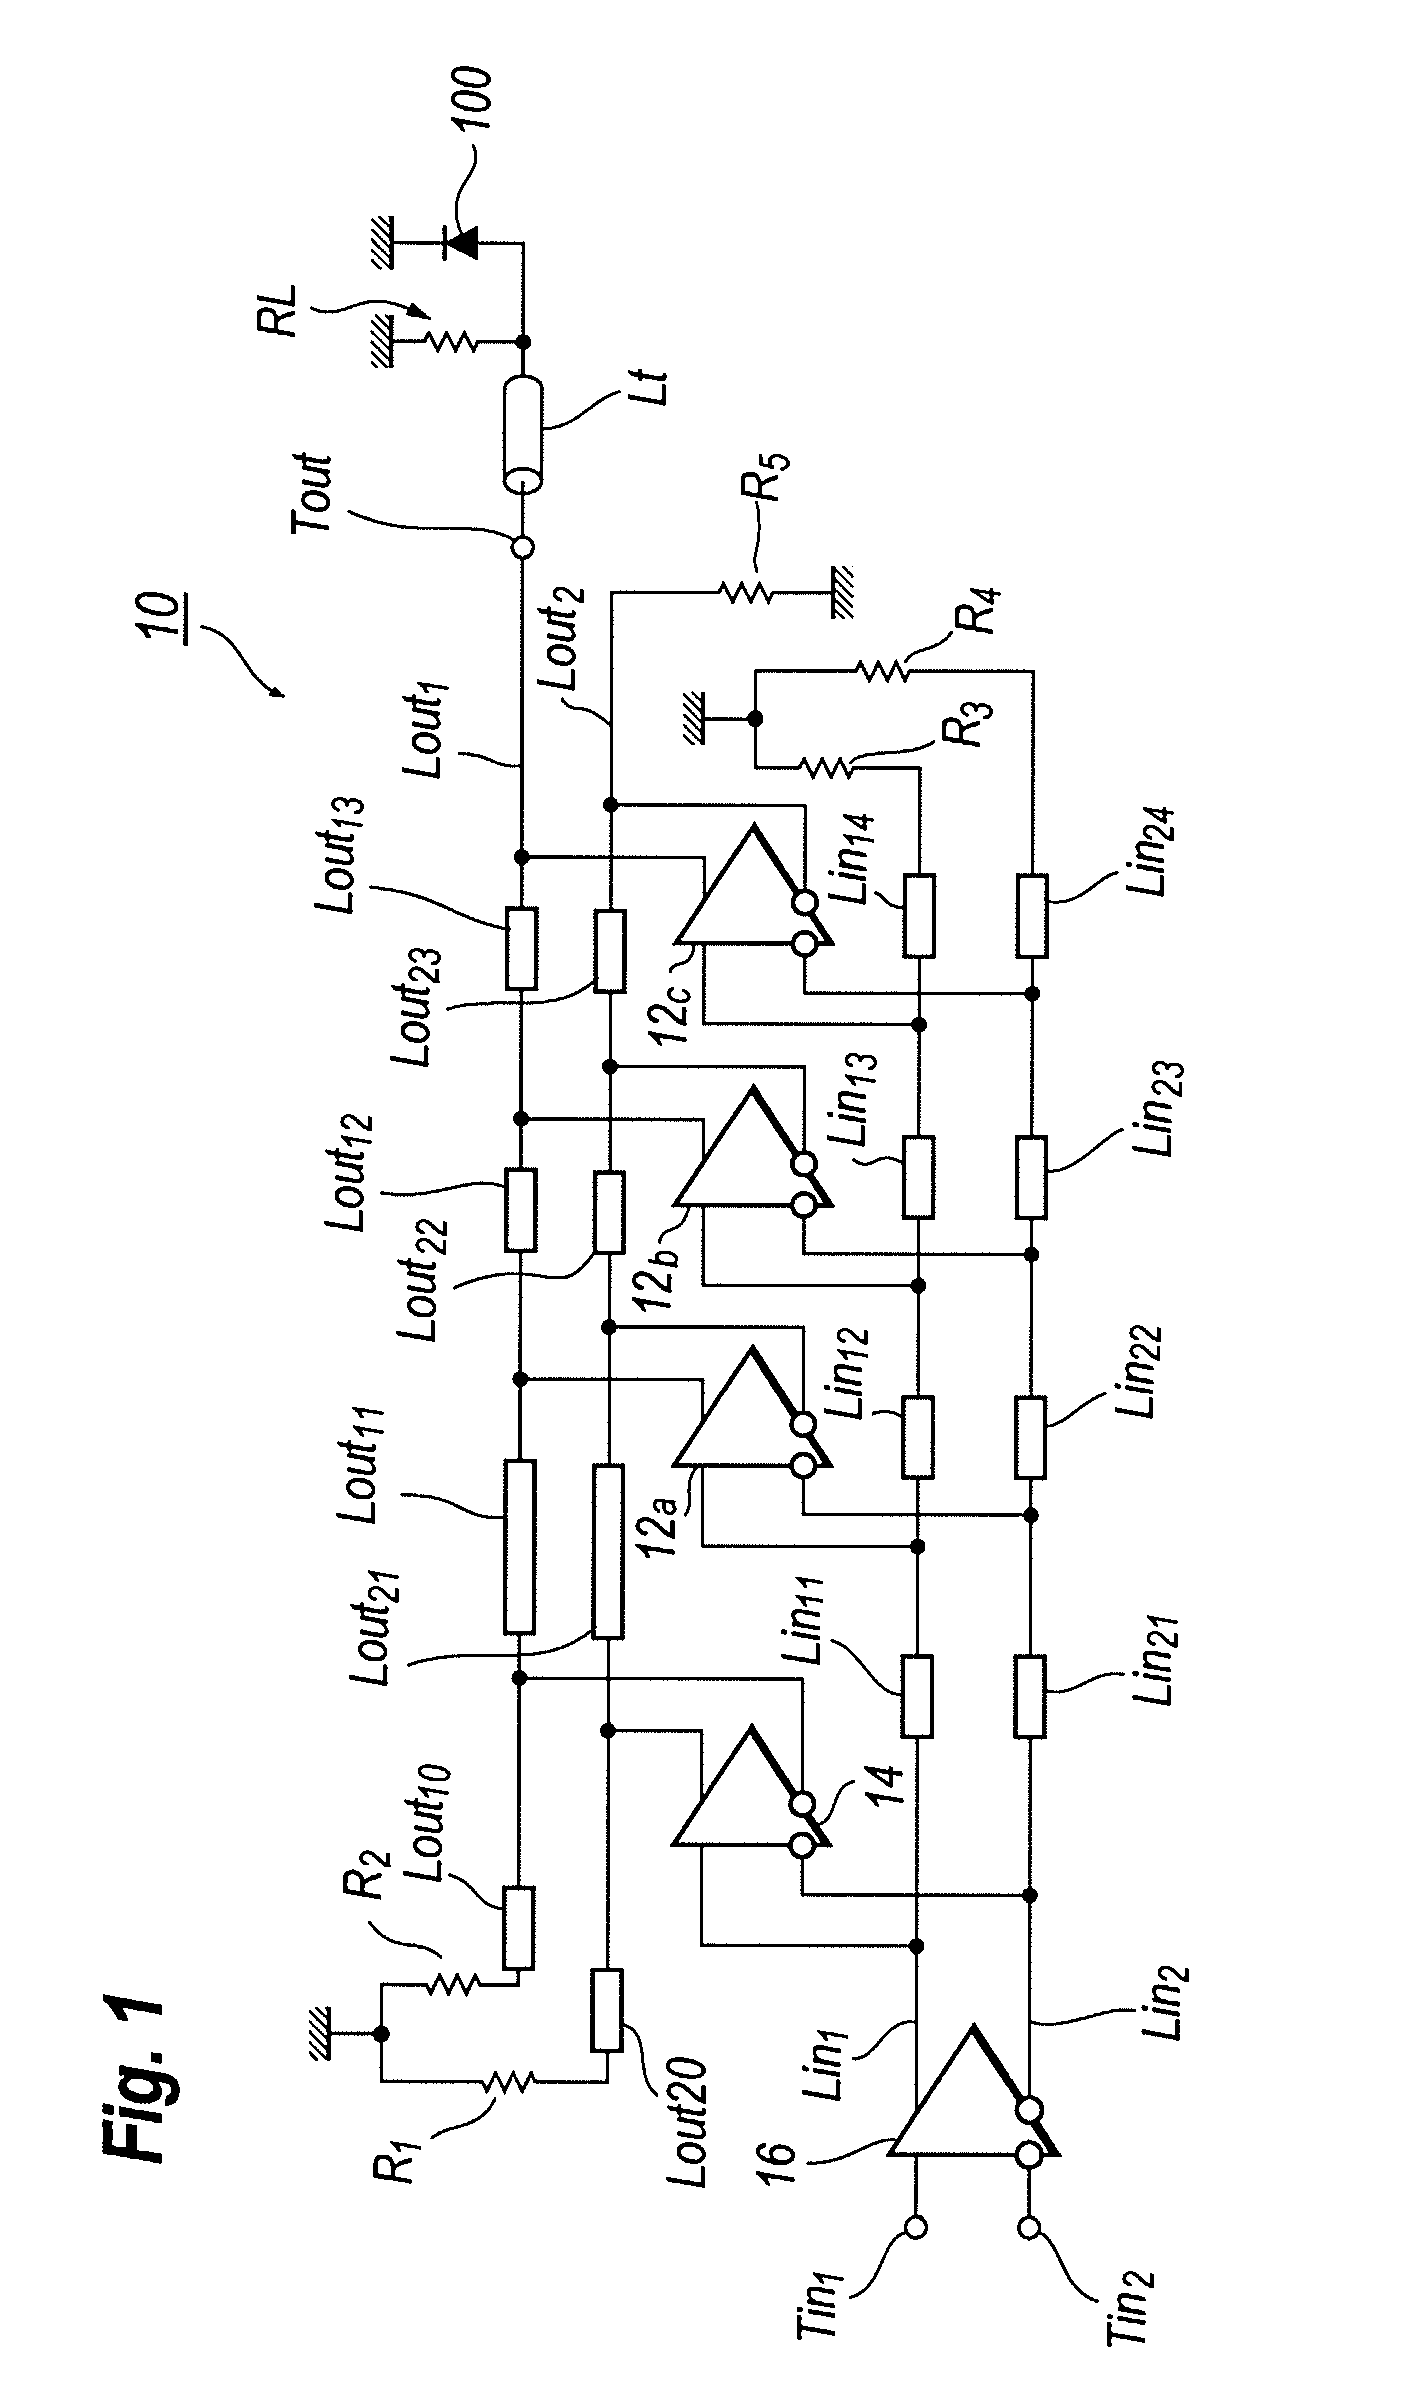 Traveling wave amplifier with pre-emphasis function